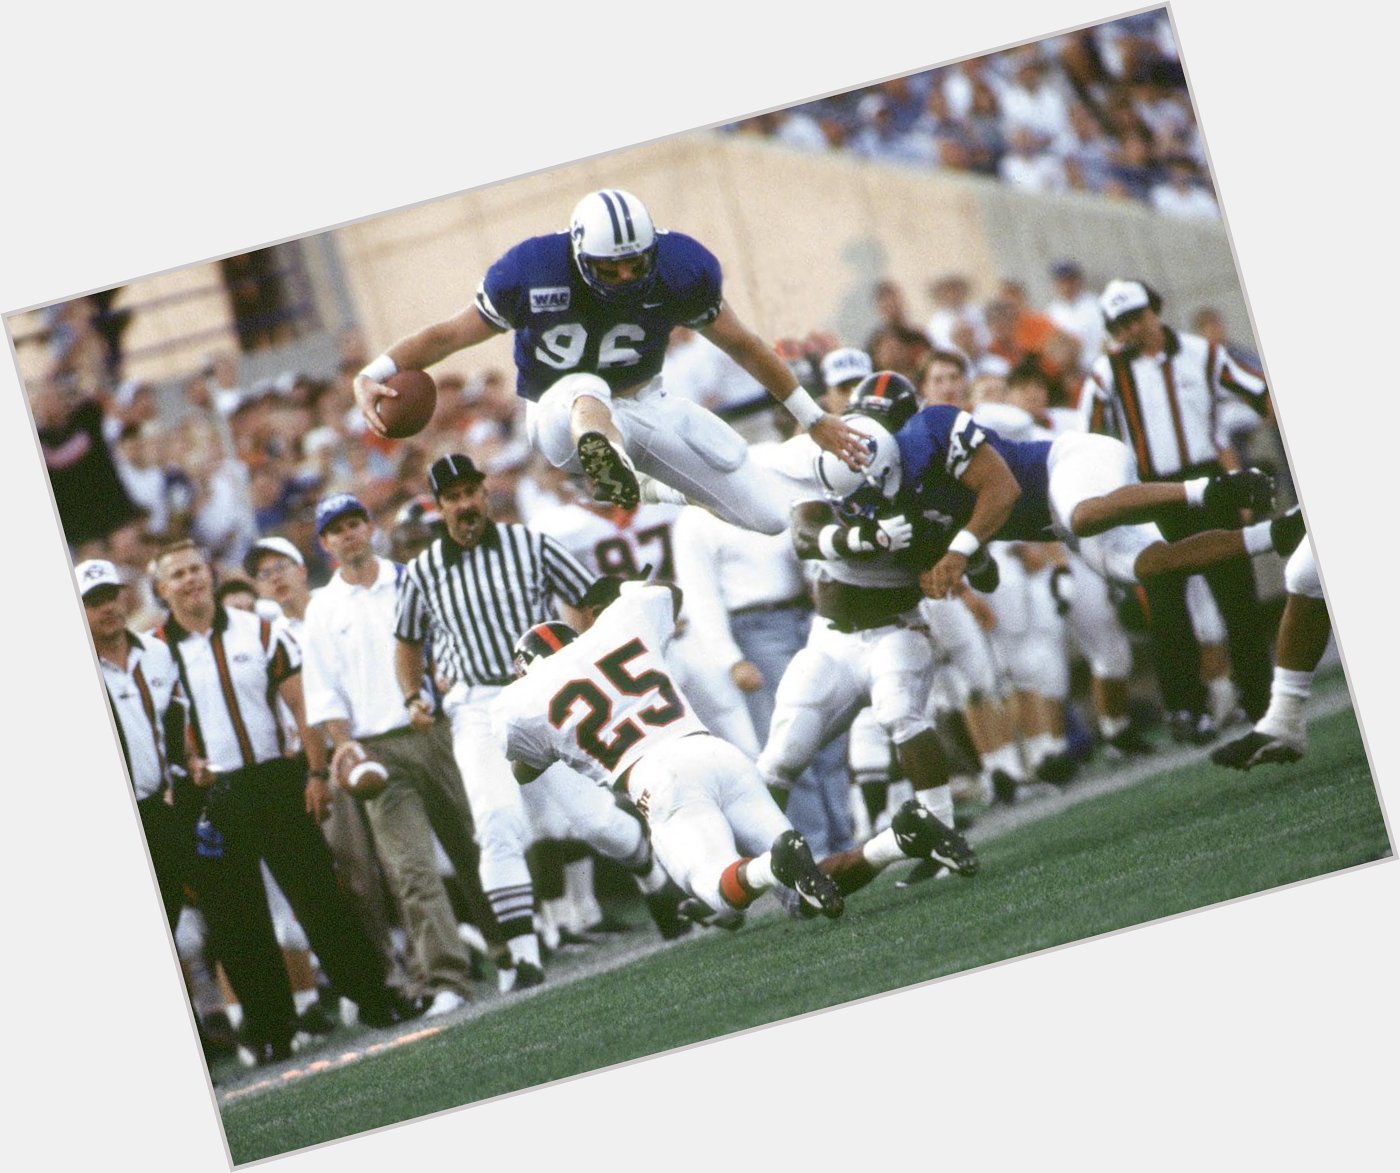 Happy birthday to BYU standout and Eagles legend Chad Lewis! 